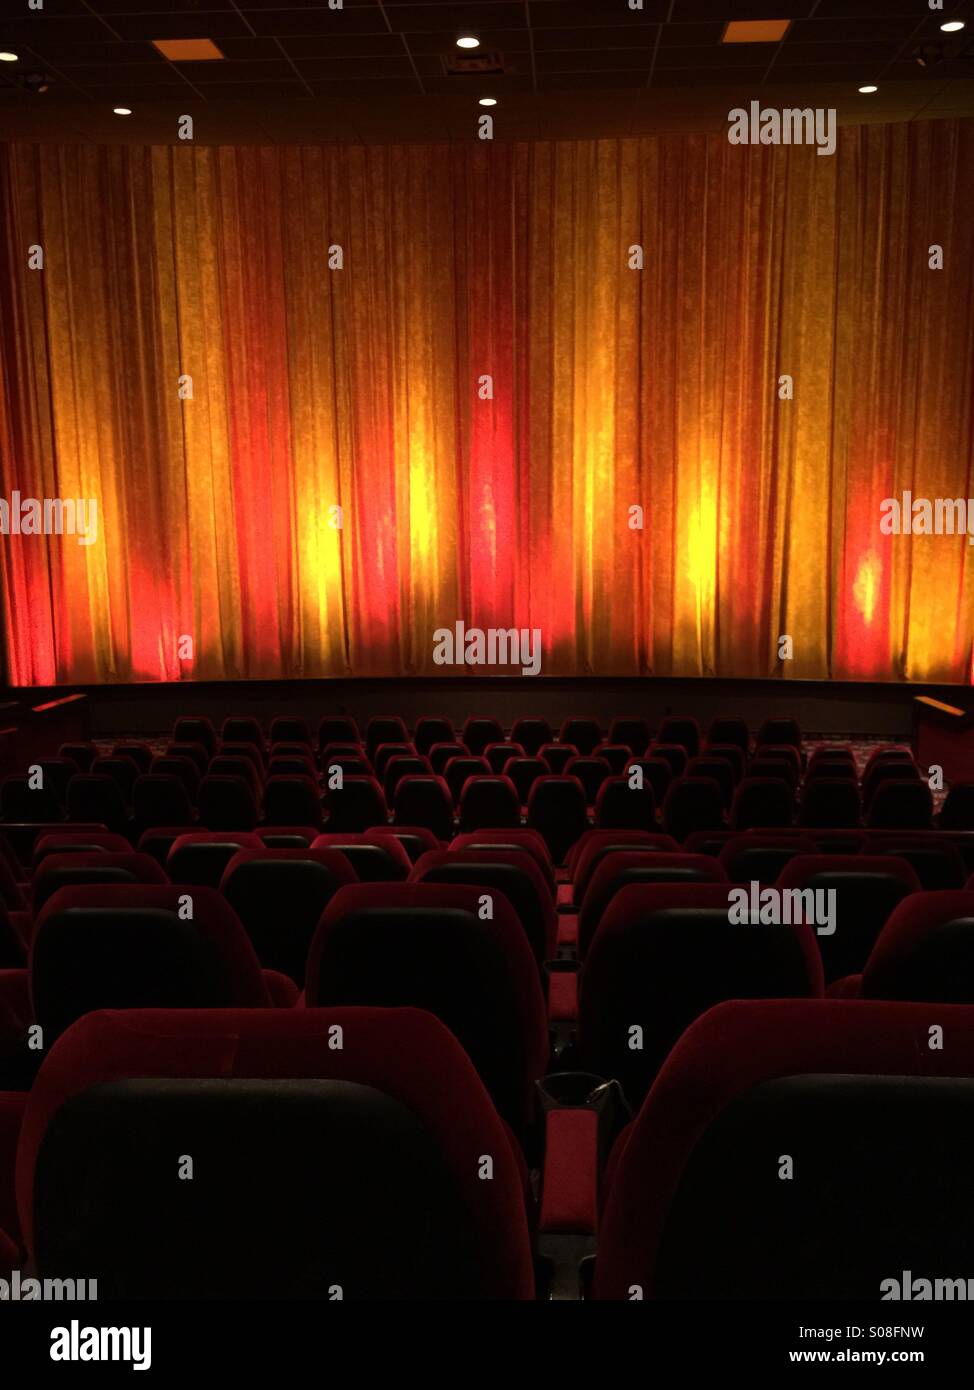 The curtain of a movie theater before the film starts Stock Photo